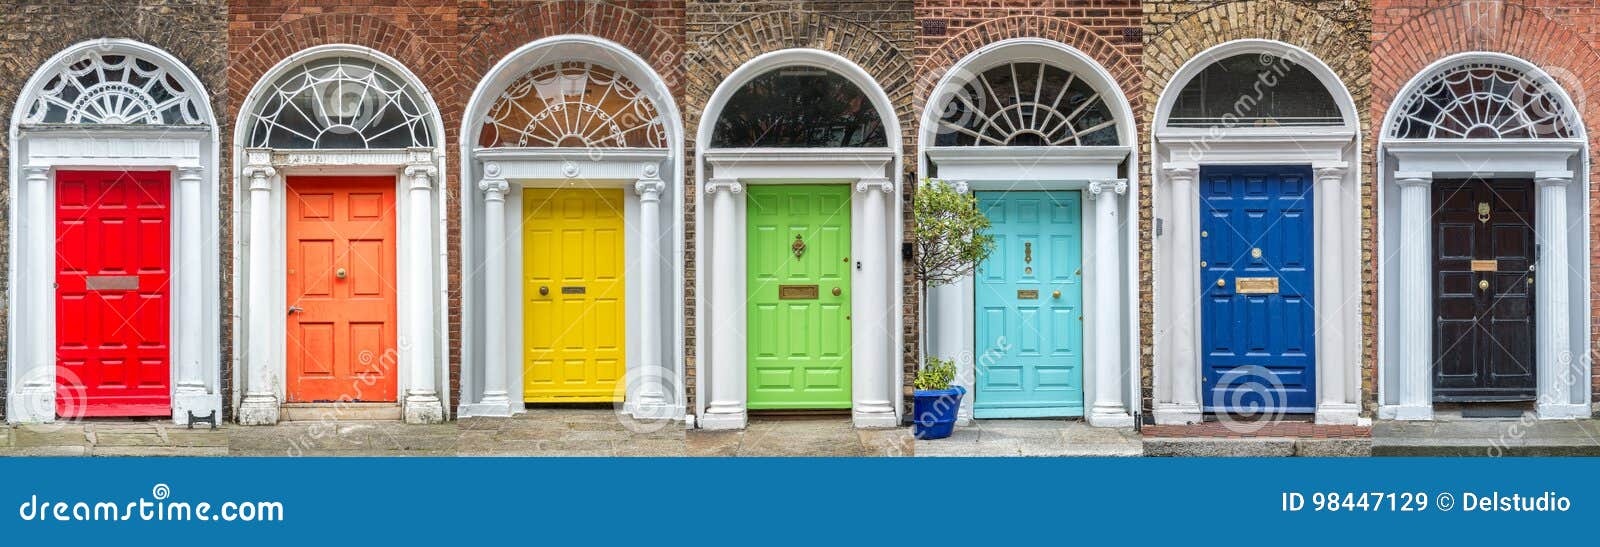 panoramic rainbow colors collection of doors in dublin ireland